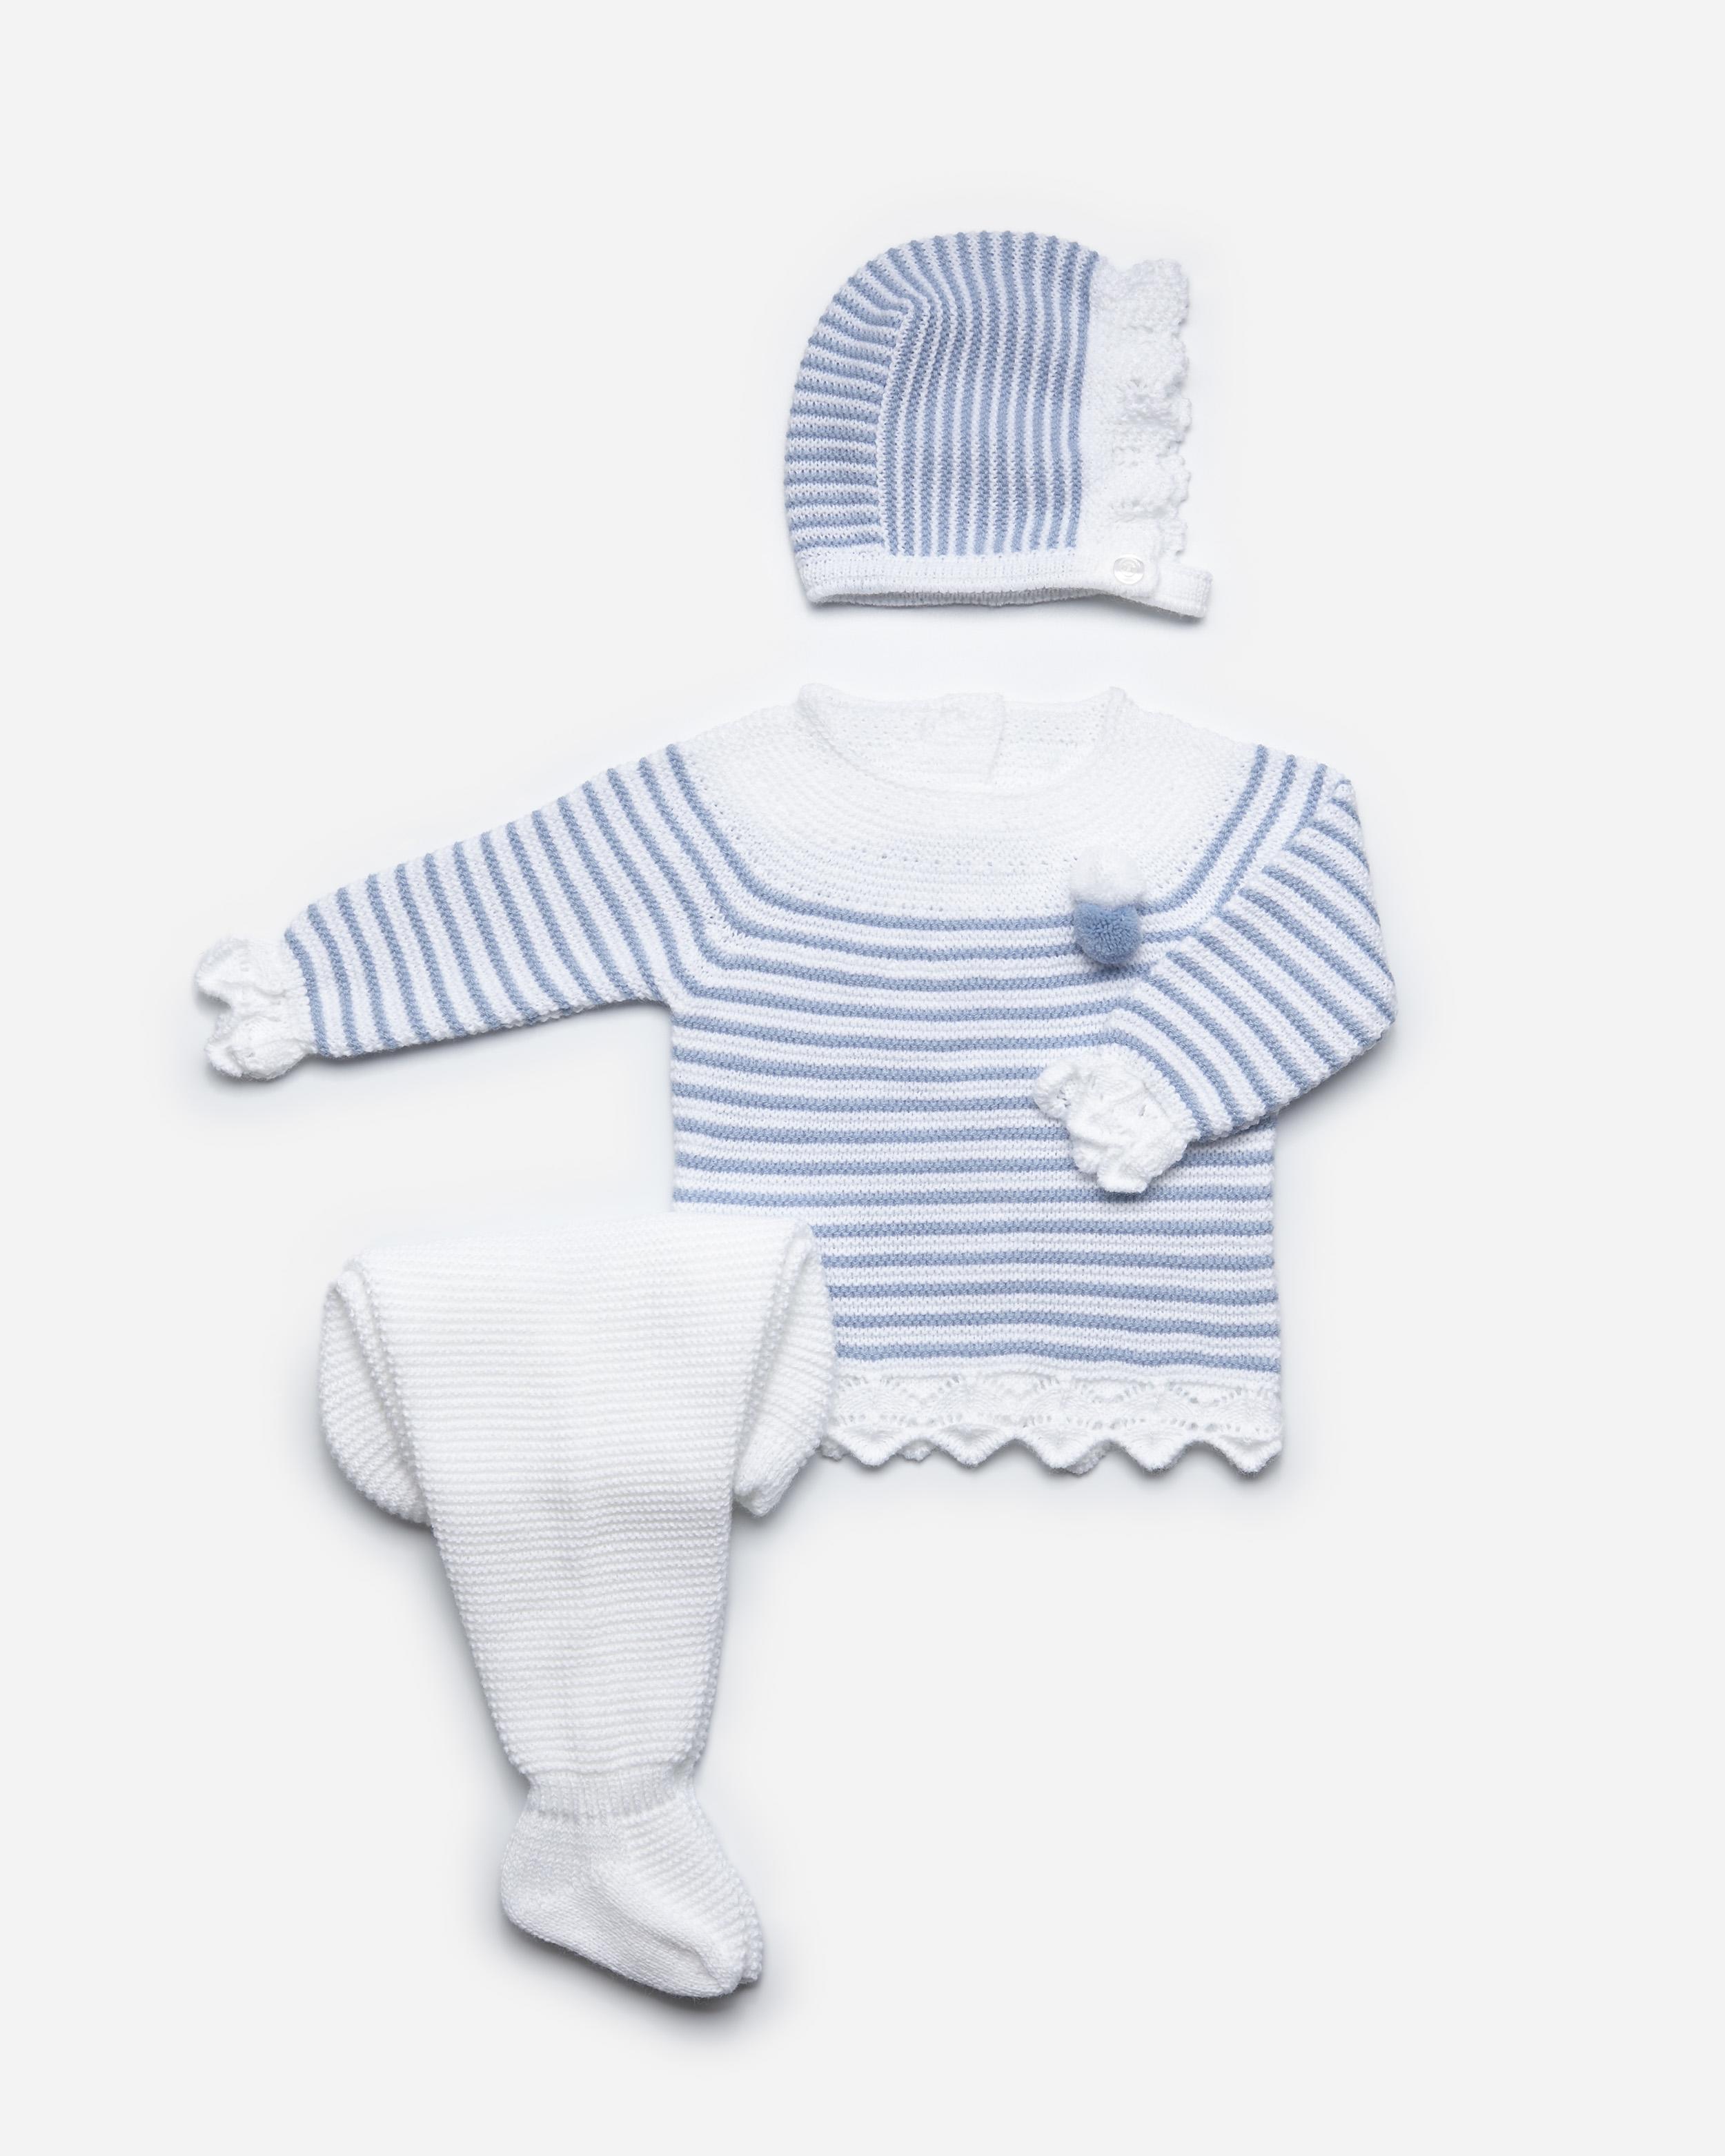 Navy blue & white stripe jumper with matching bonnet.White knitted close toe trousers